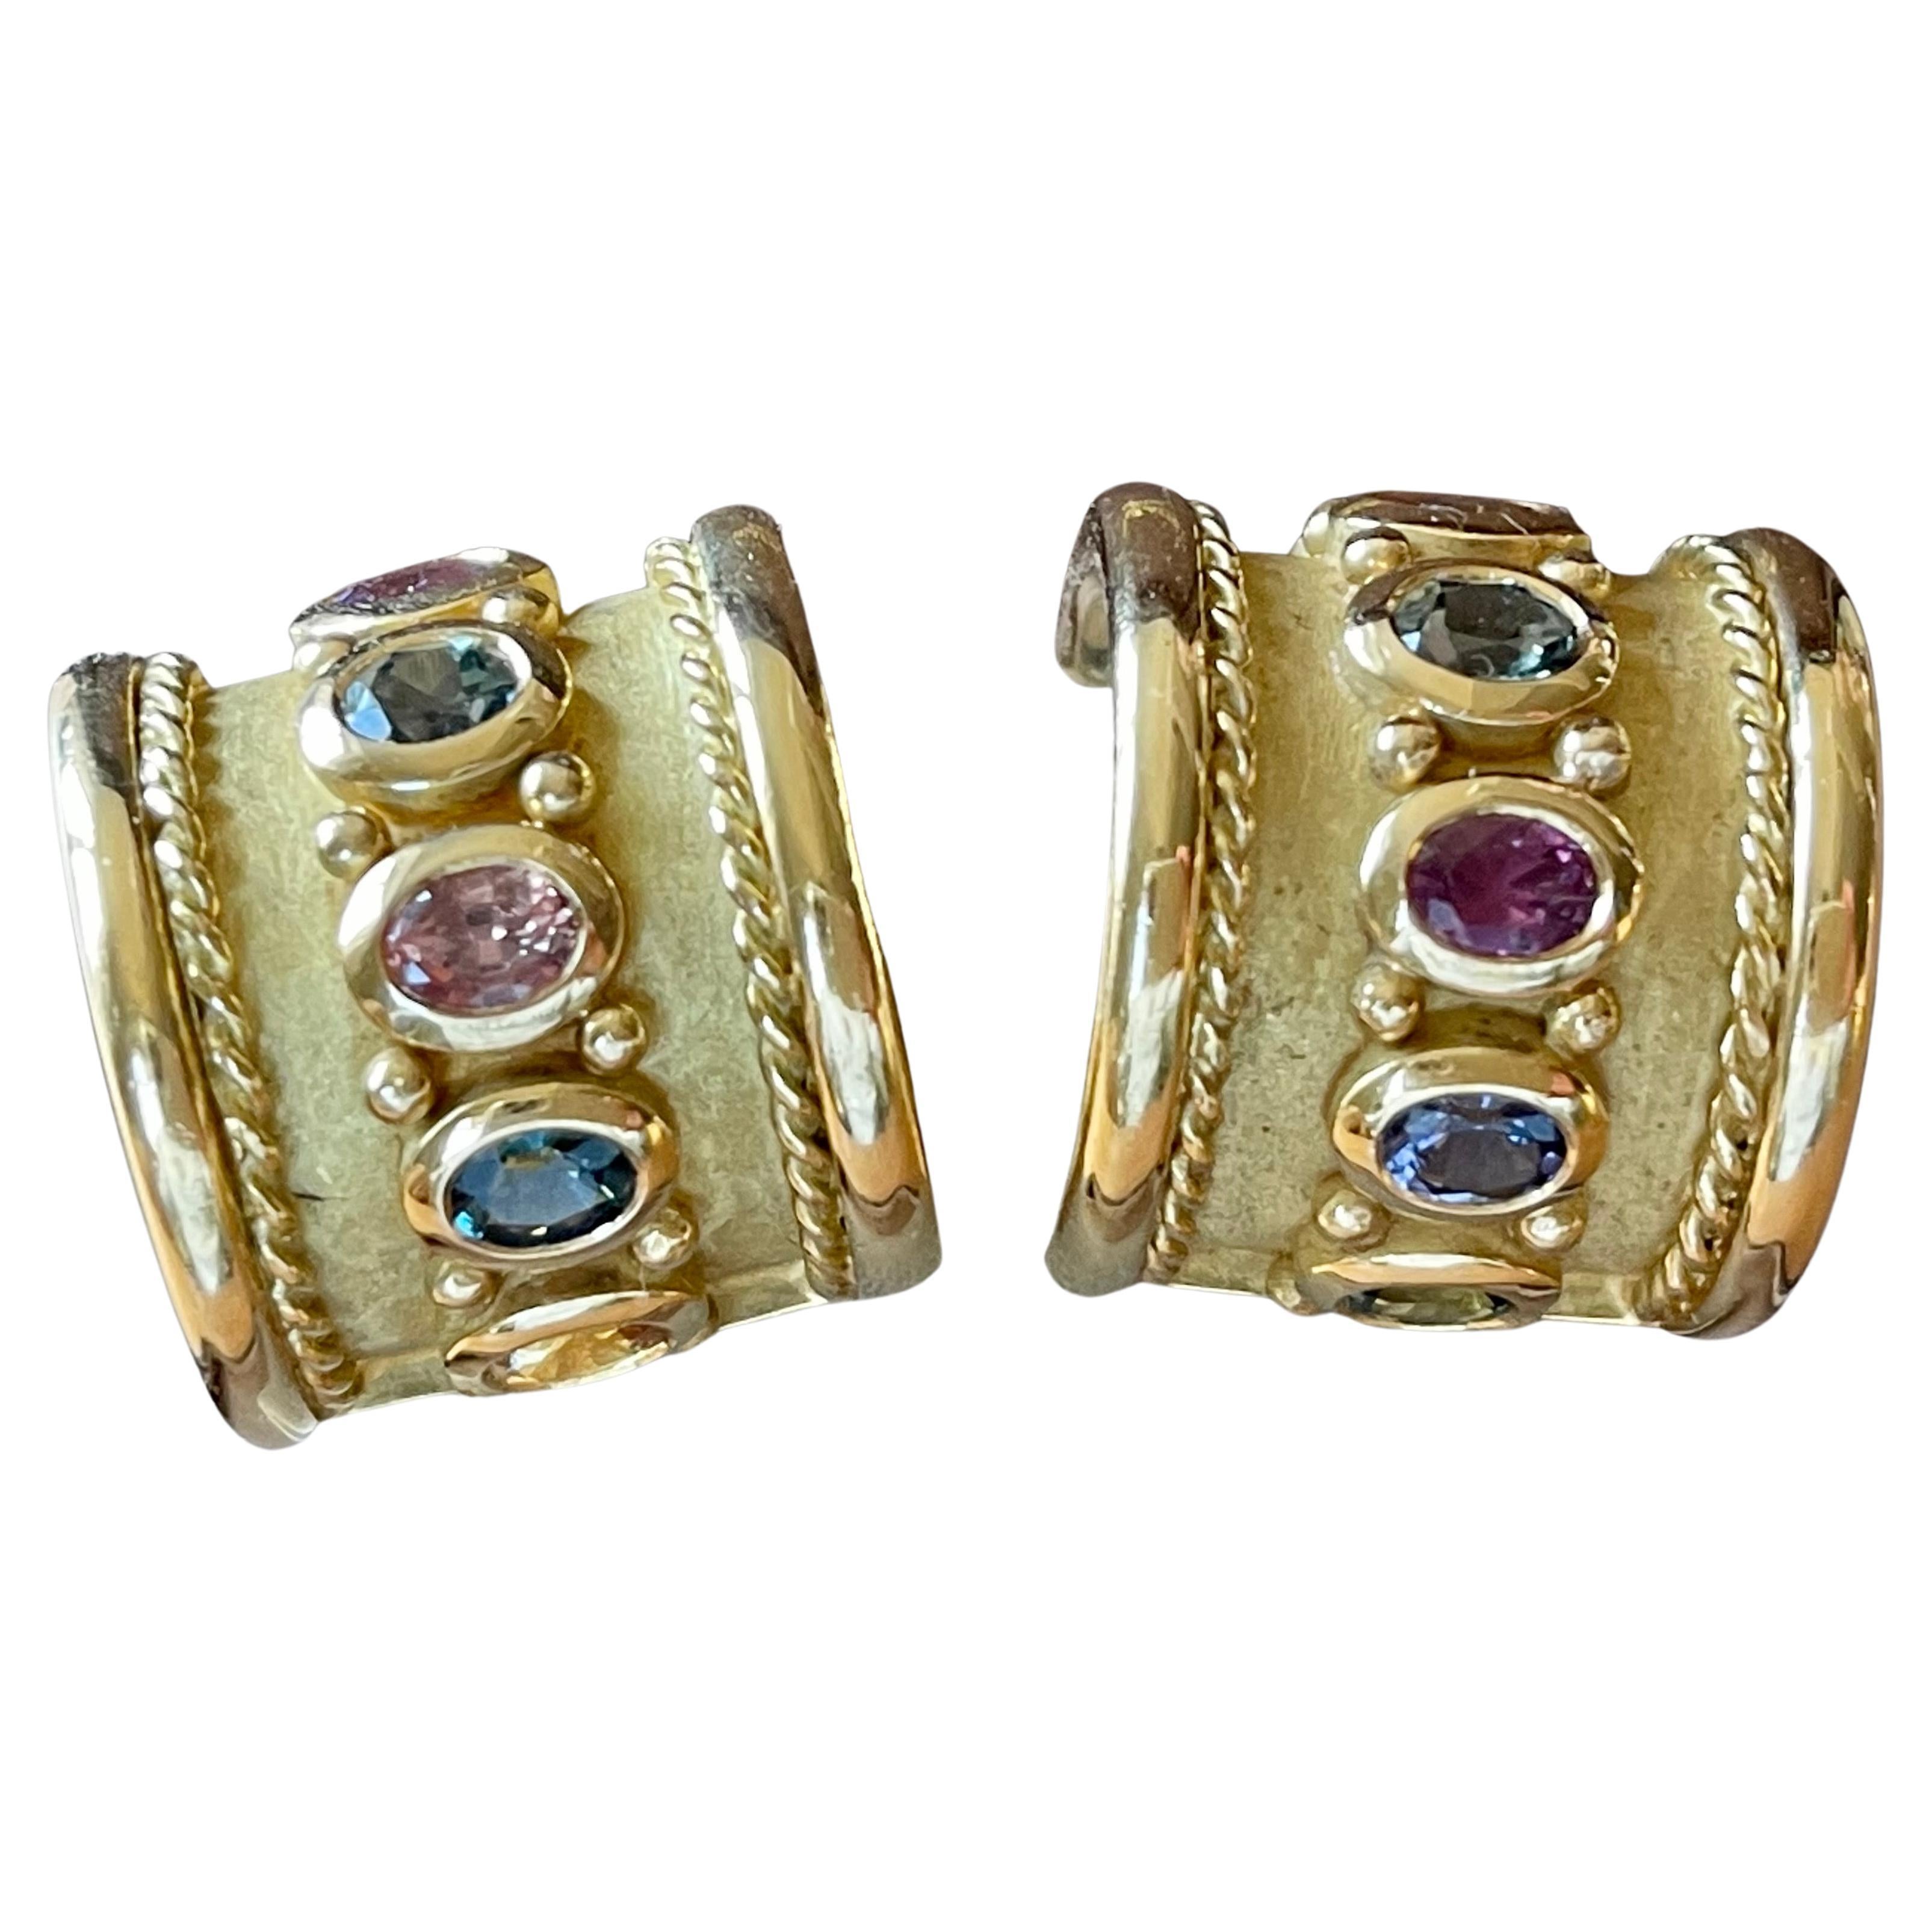 Very lovely handmade 18 K yellow Gold earclips featuring 12 fancy colored Sapphires weighing approximately 10 ct. 
Length: 2 cm
Width: 1.9 cm
Weight: 38.69
Masterfully handcrafted piece! Authenticity and money back is guaranteed.   
For any